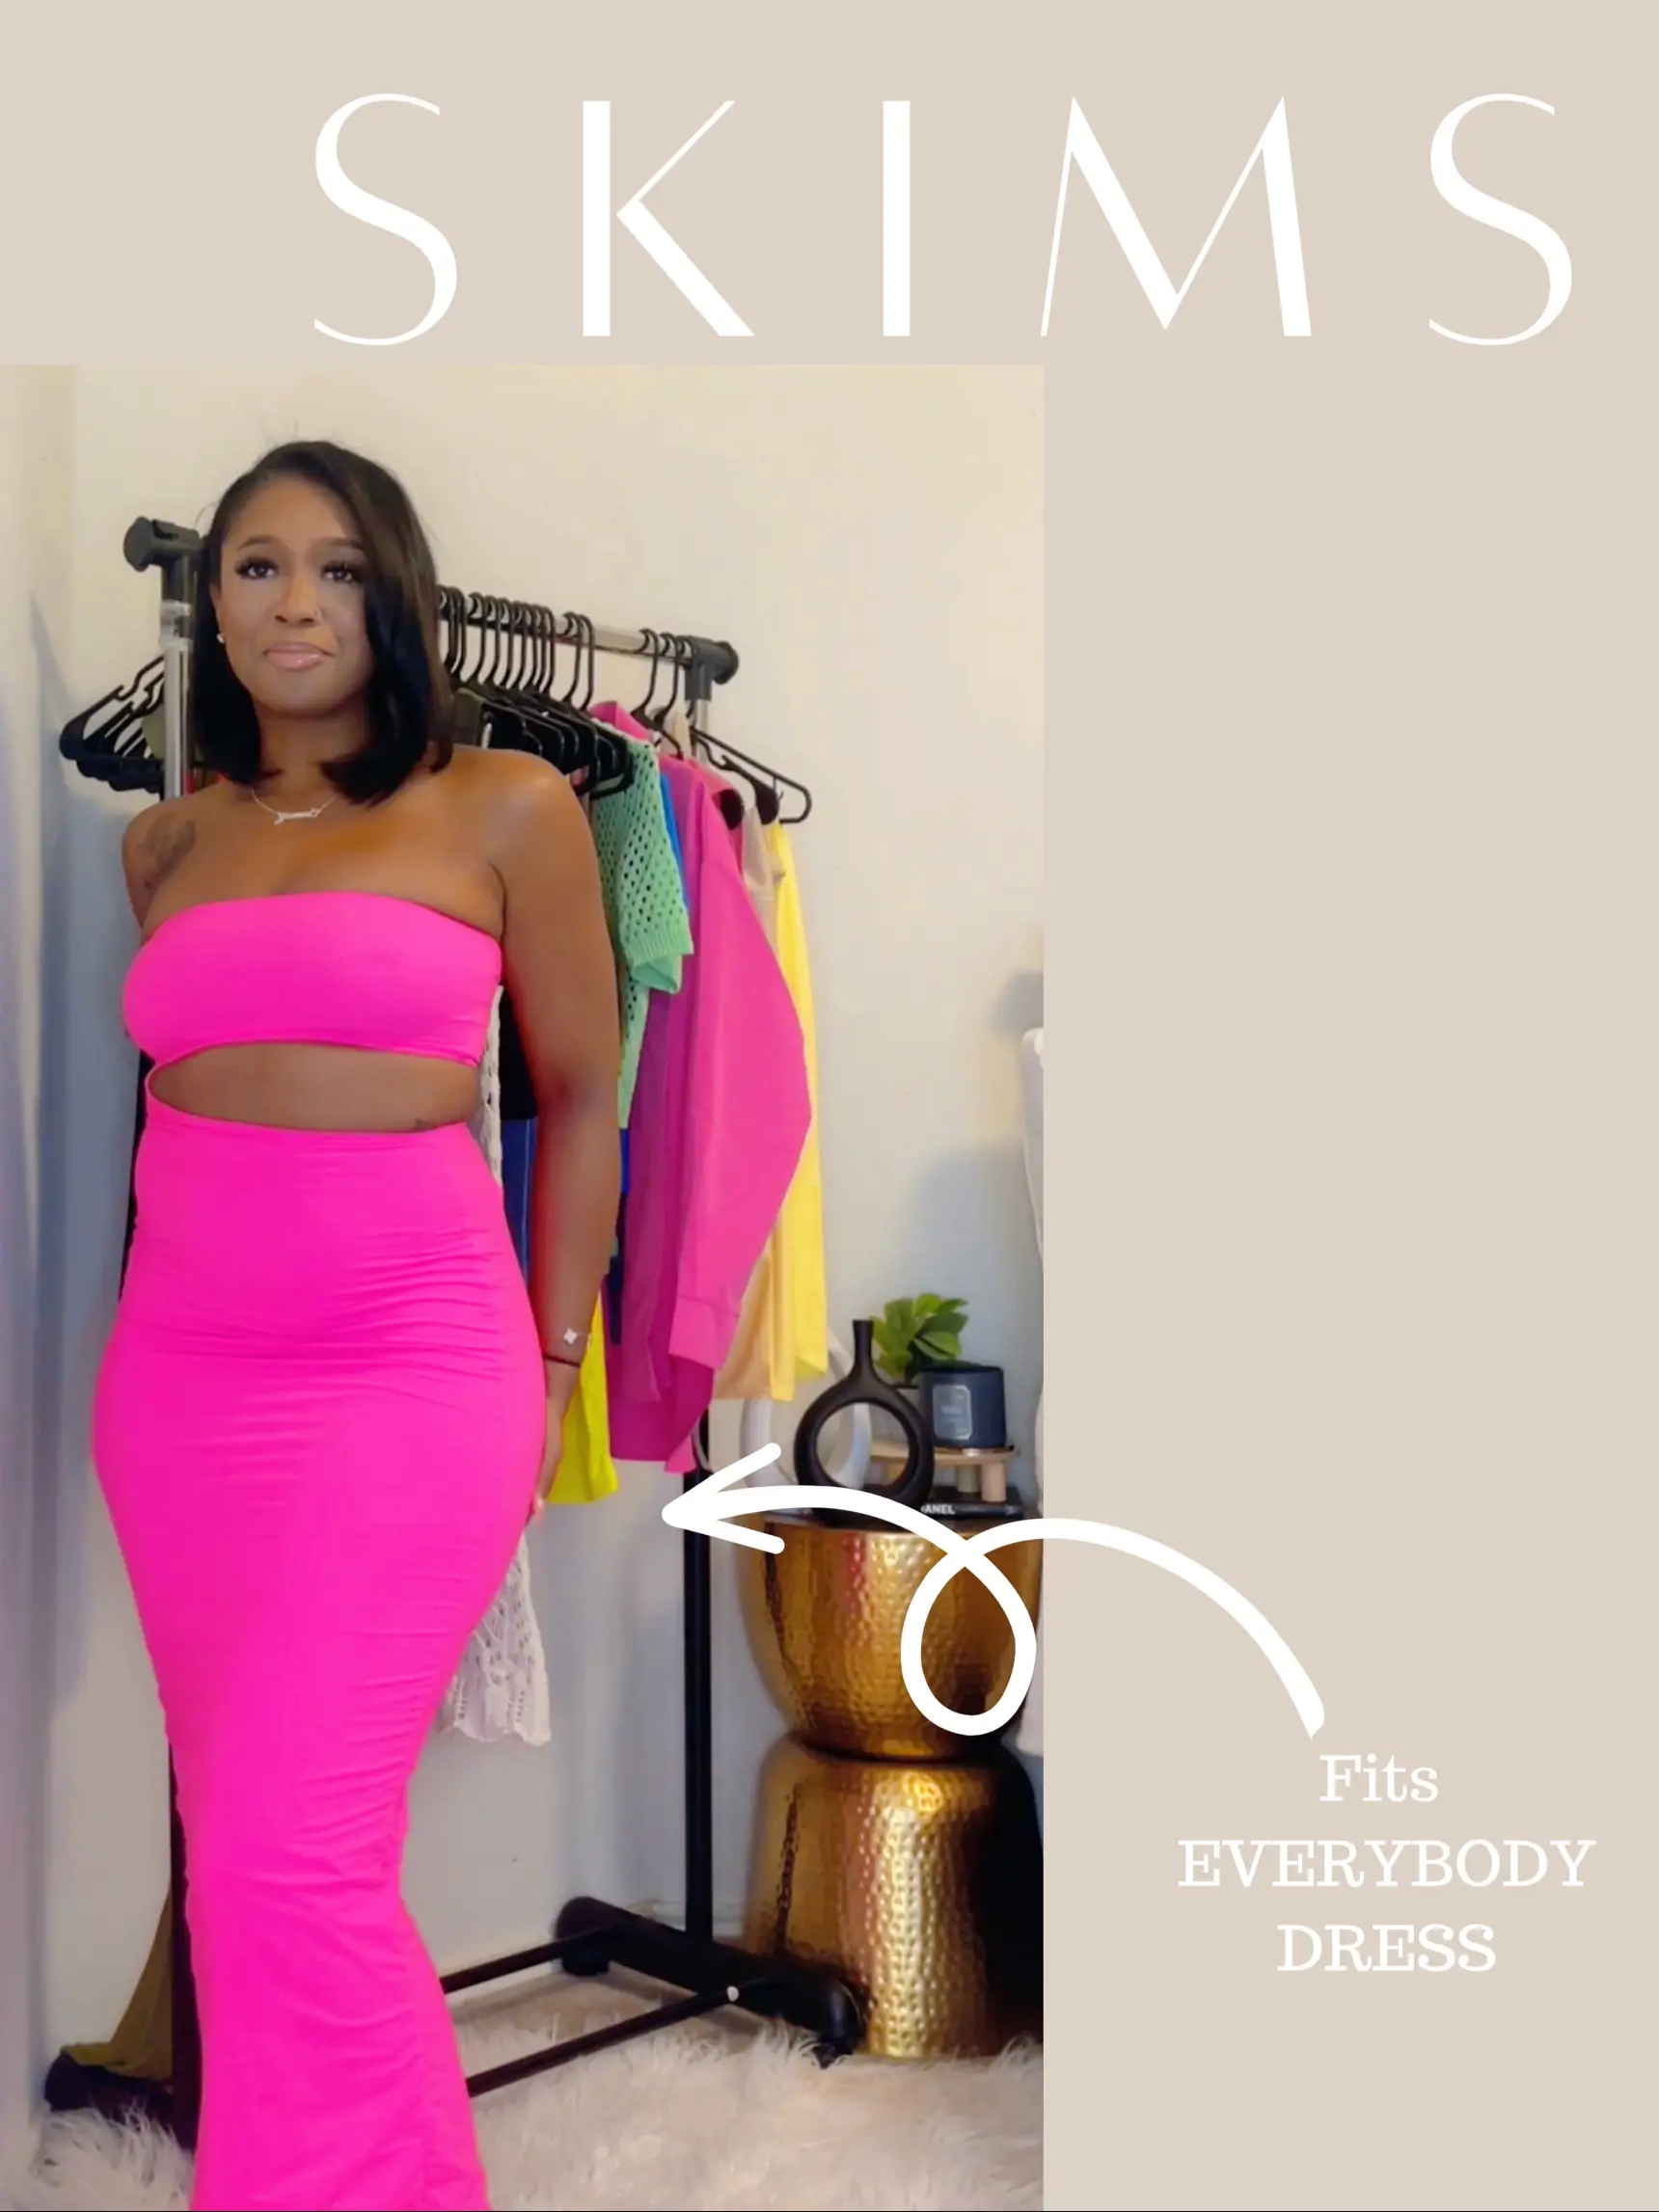 Skims Fits Everybody Dress, Video published by Lindsey Yvette